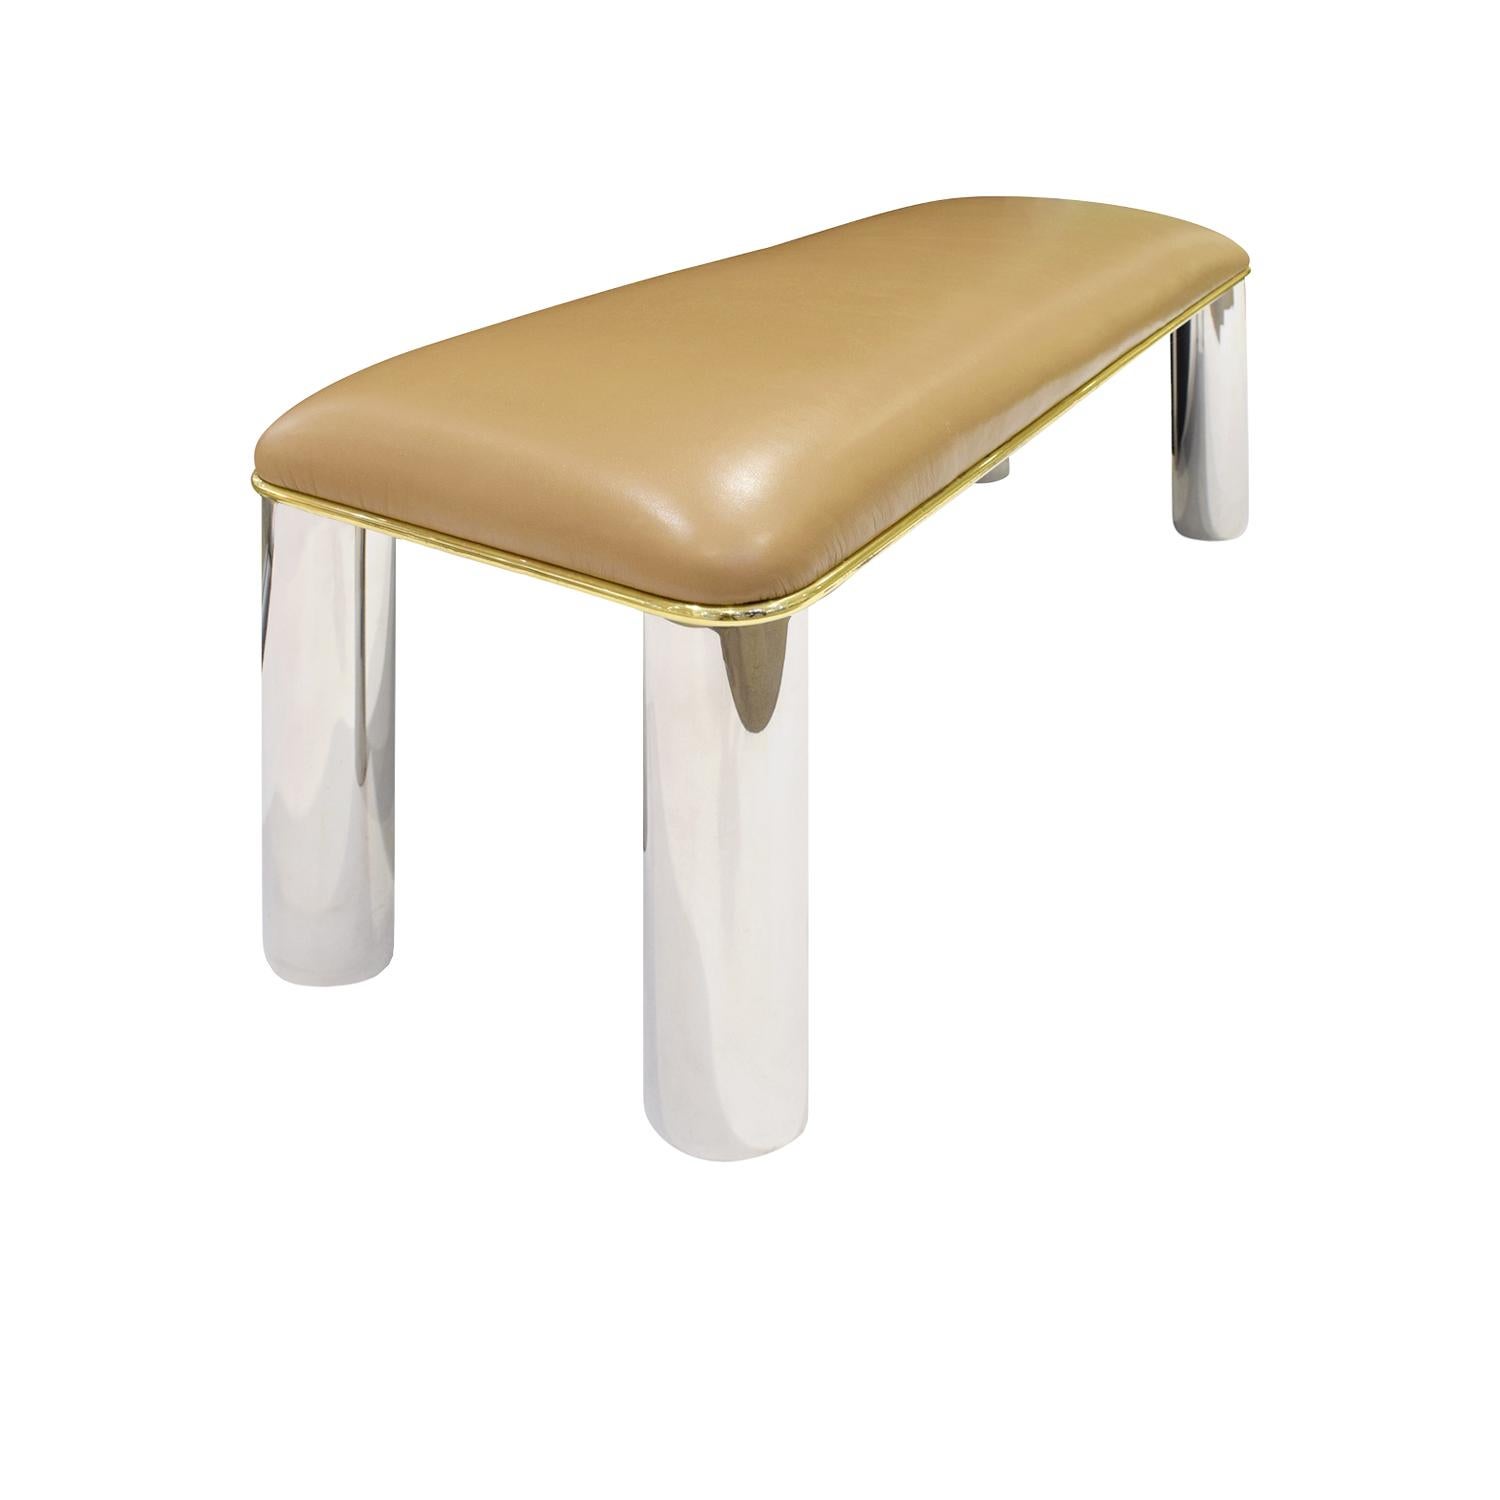 Long bench with base in polished stainless steel with thin brass trim and upholstered seat by Karl Springer, American, 1980s. The seat is currently upholstered in leather.